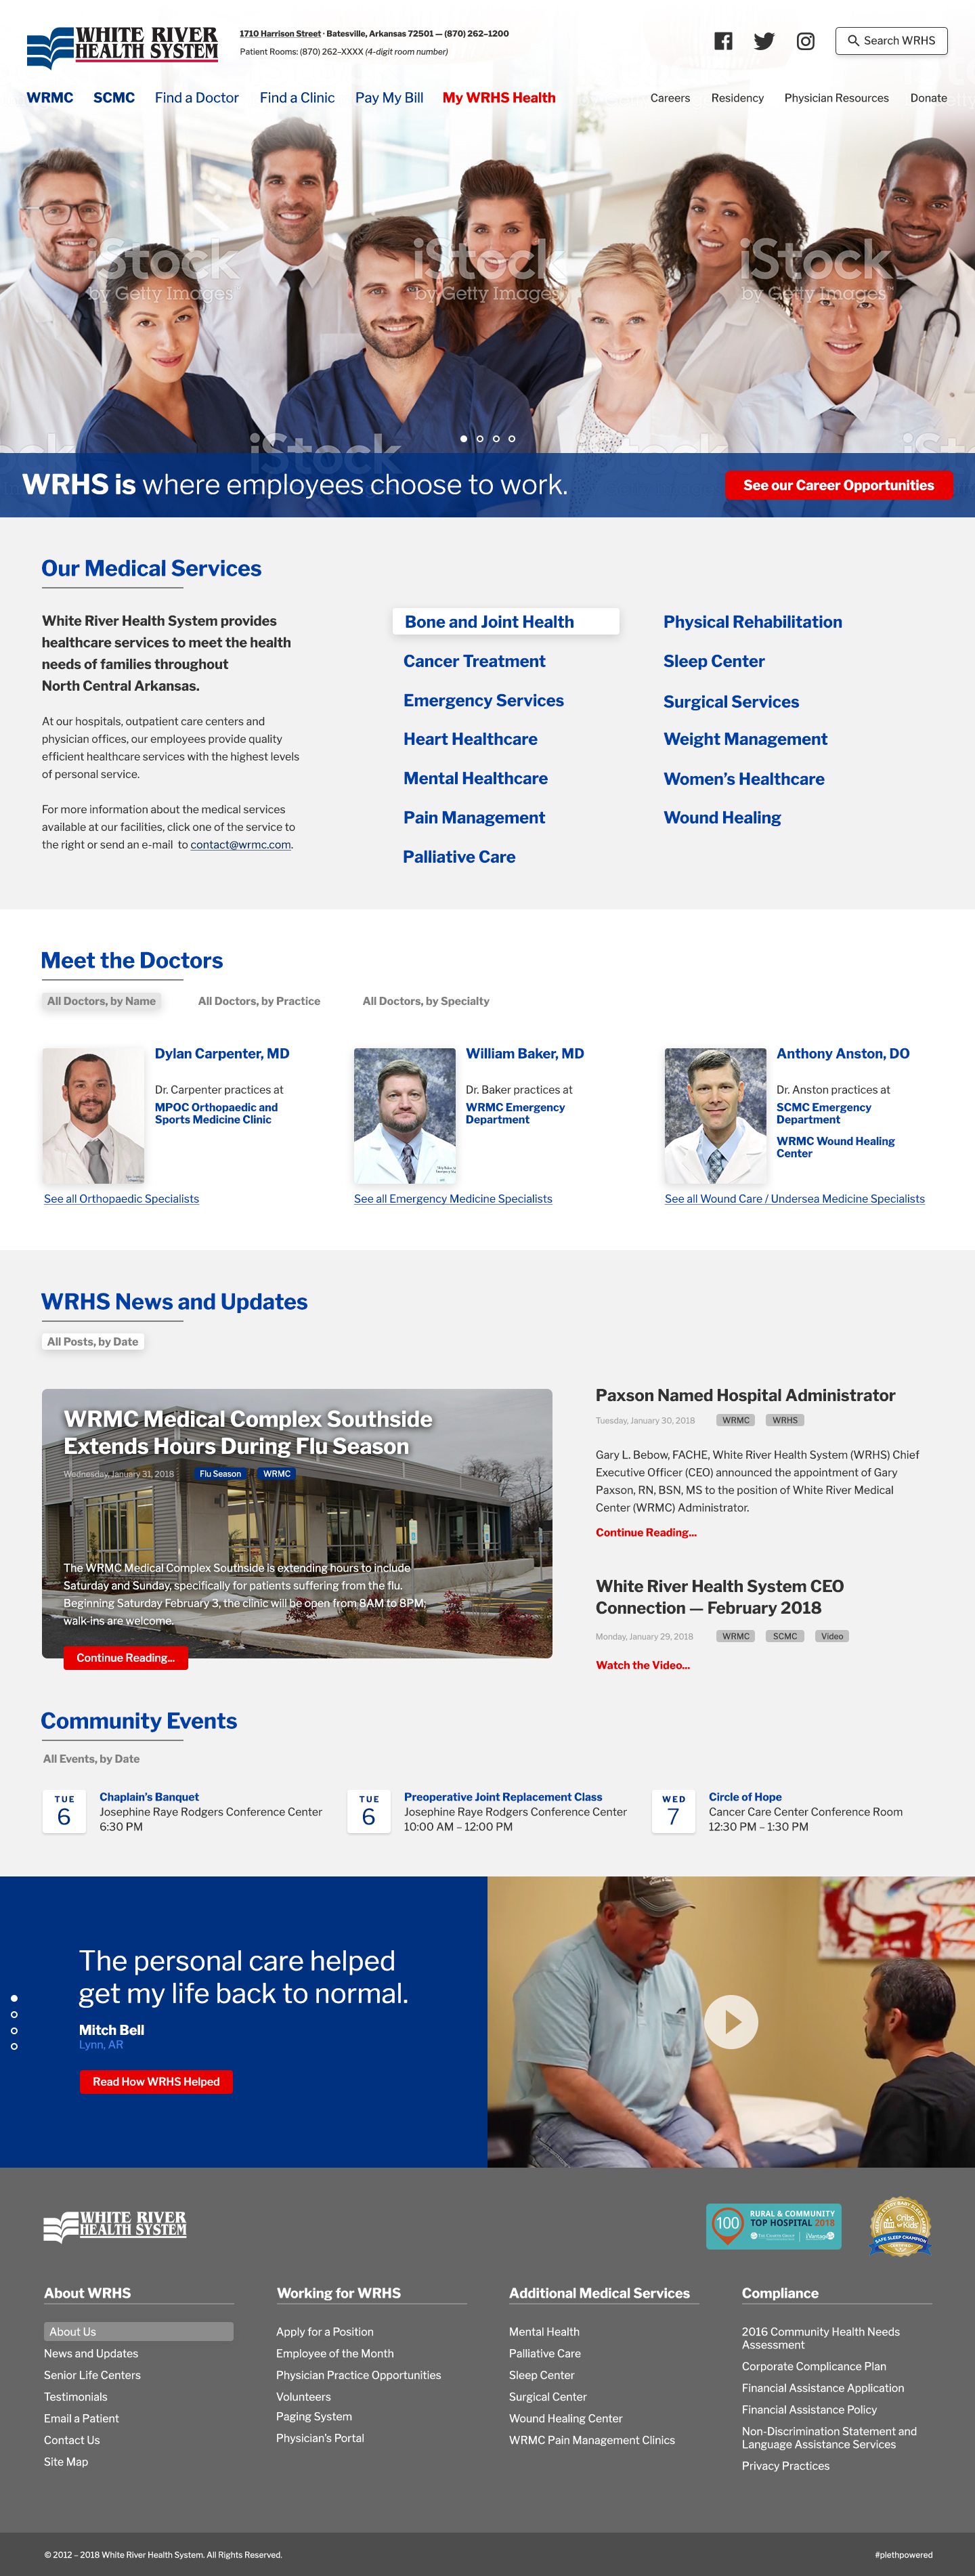 White River Health System, Home page